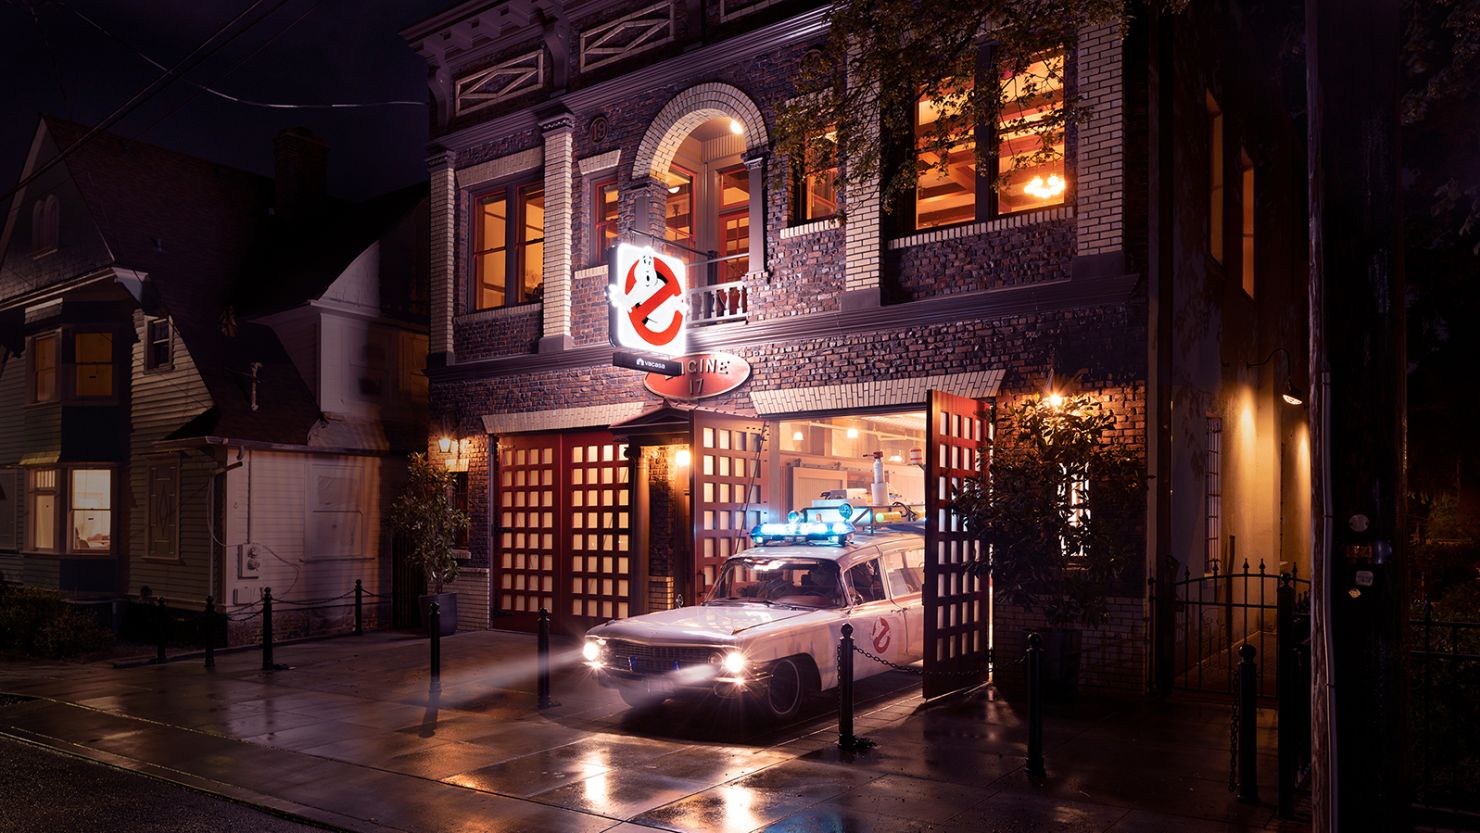 The Ghostbusters Firehouse in Portland, Oregon, brings the classic film to life.